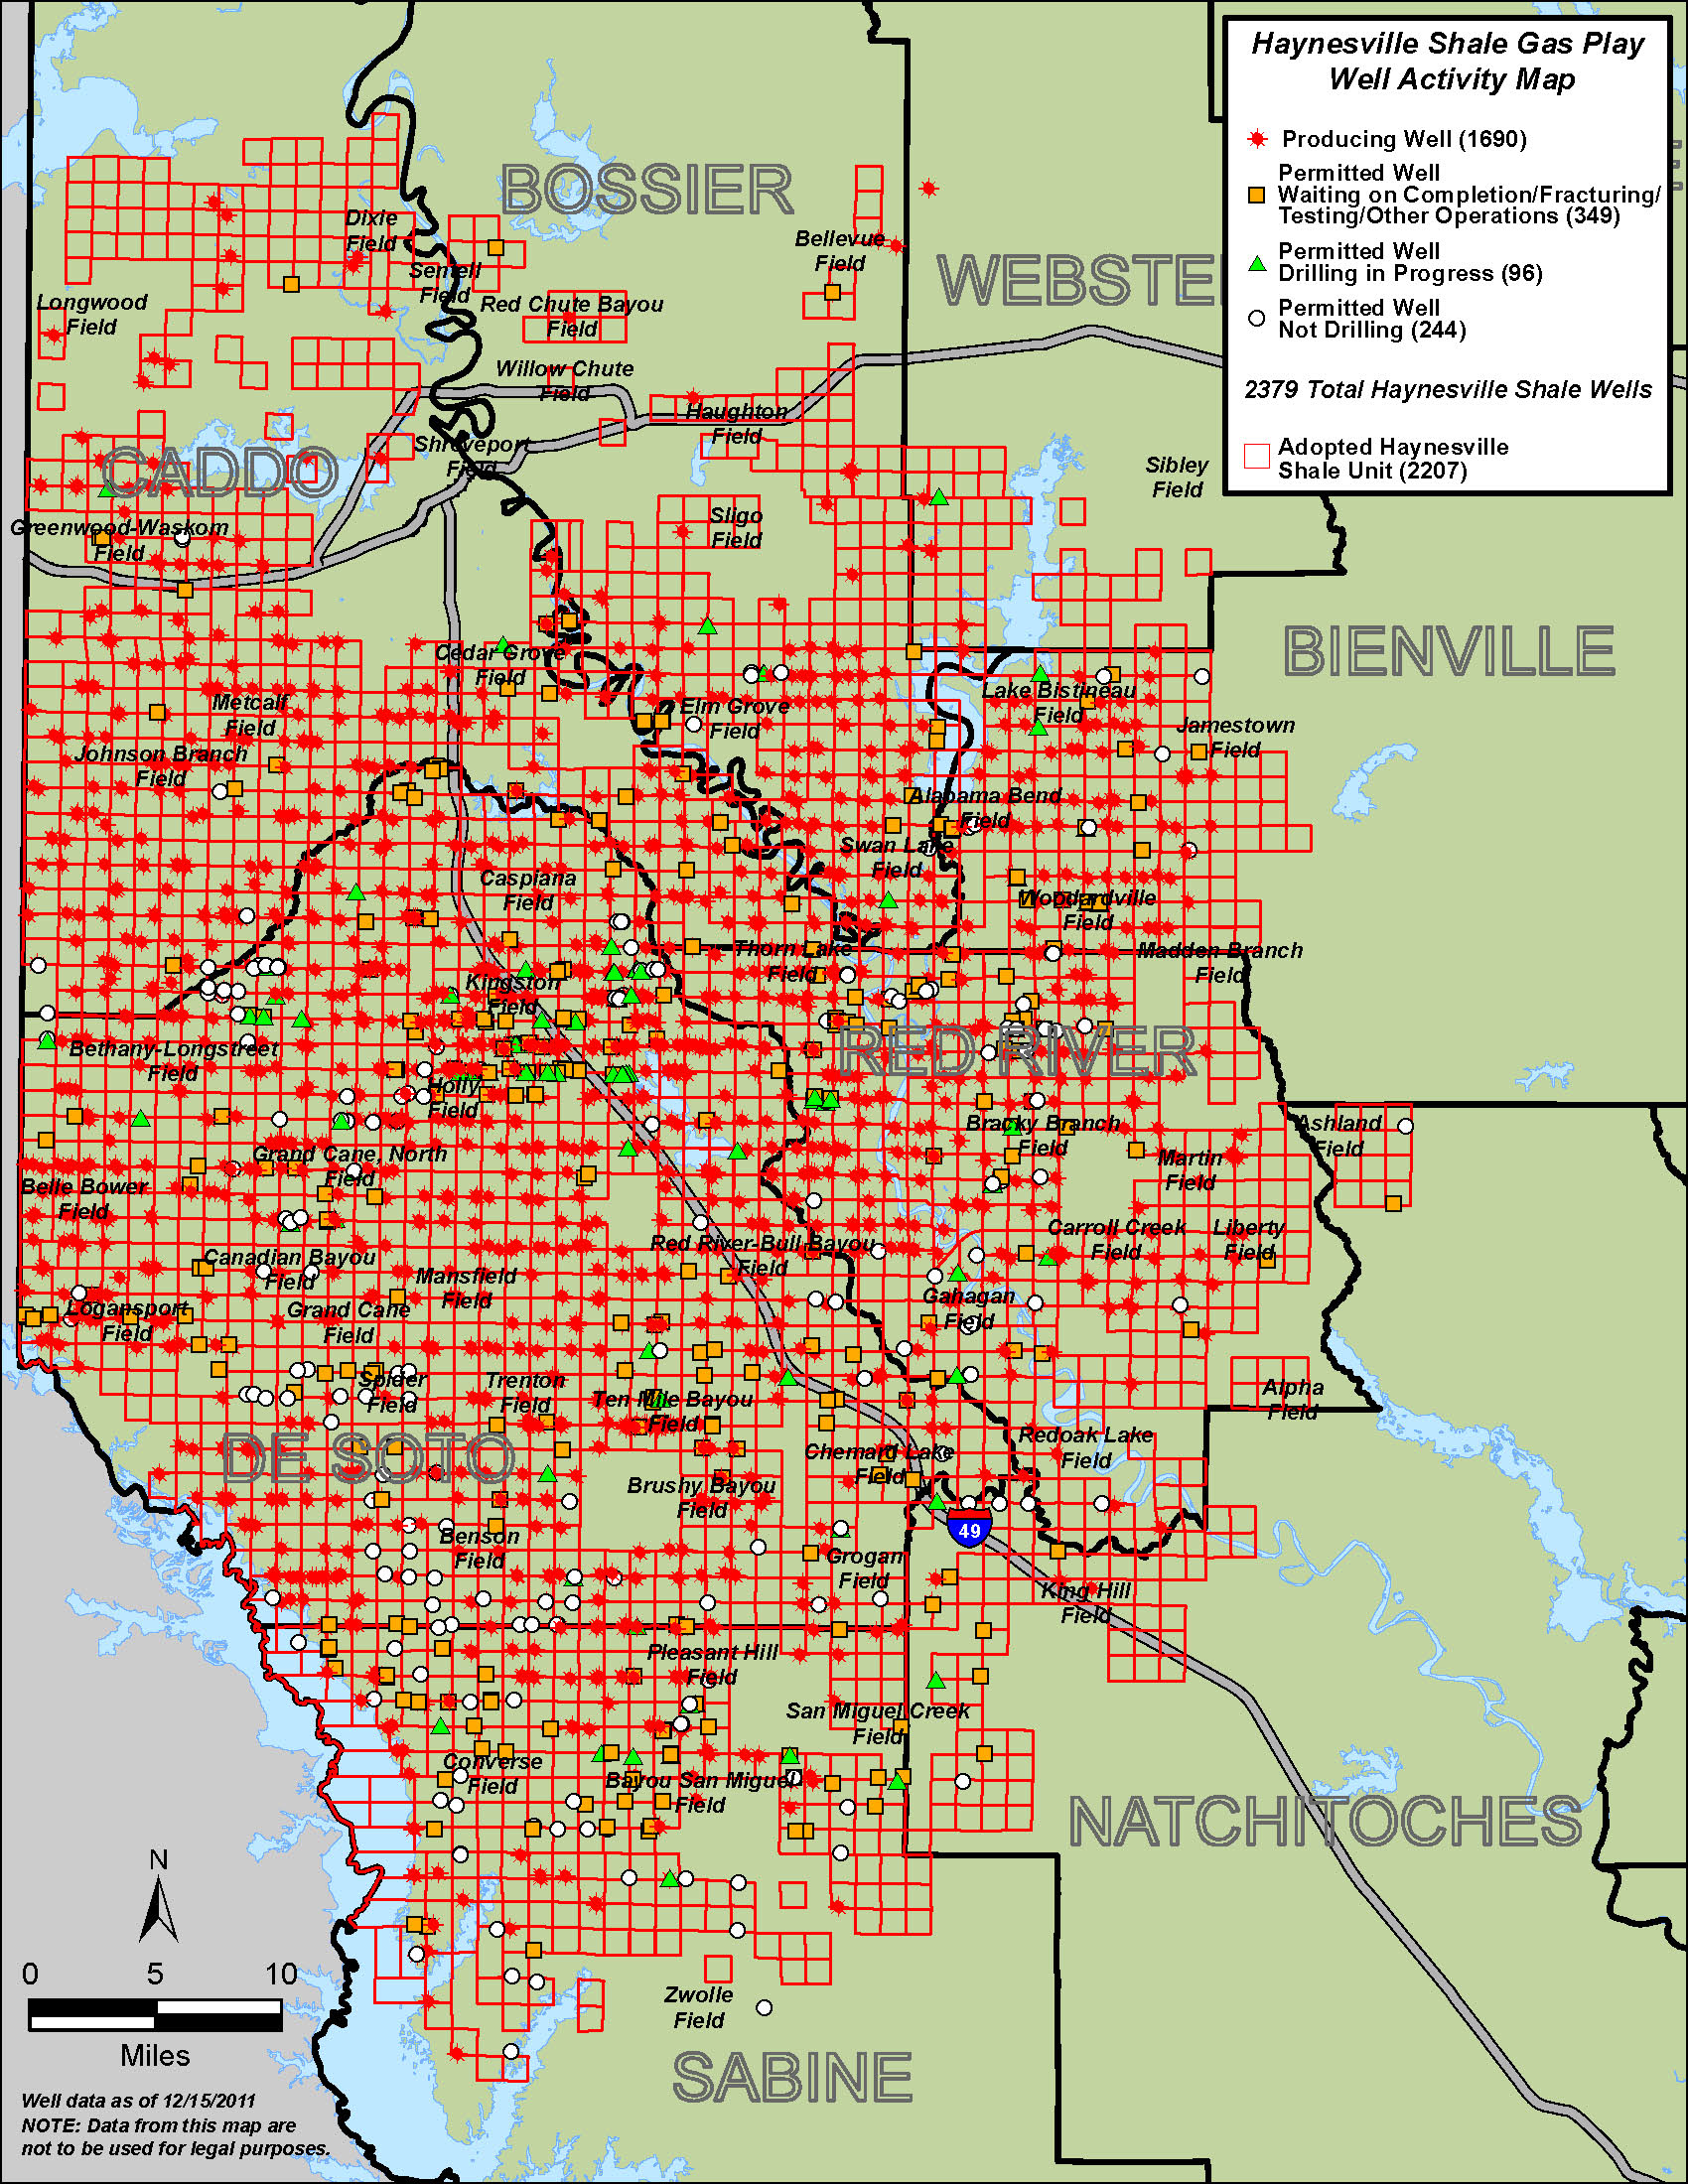 Haynesville Shale Gas Play Well Activity Map (PDF)